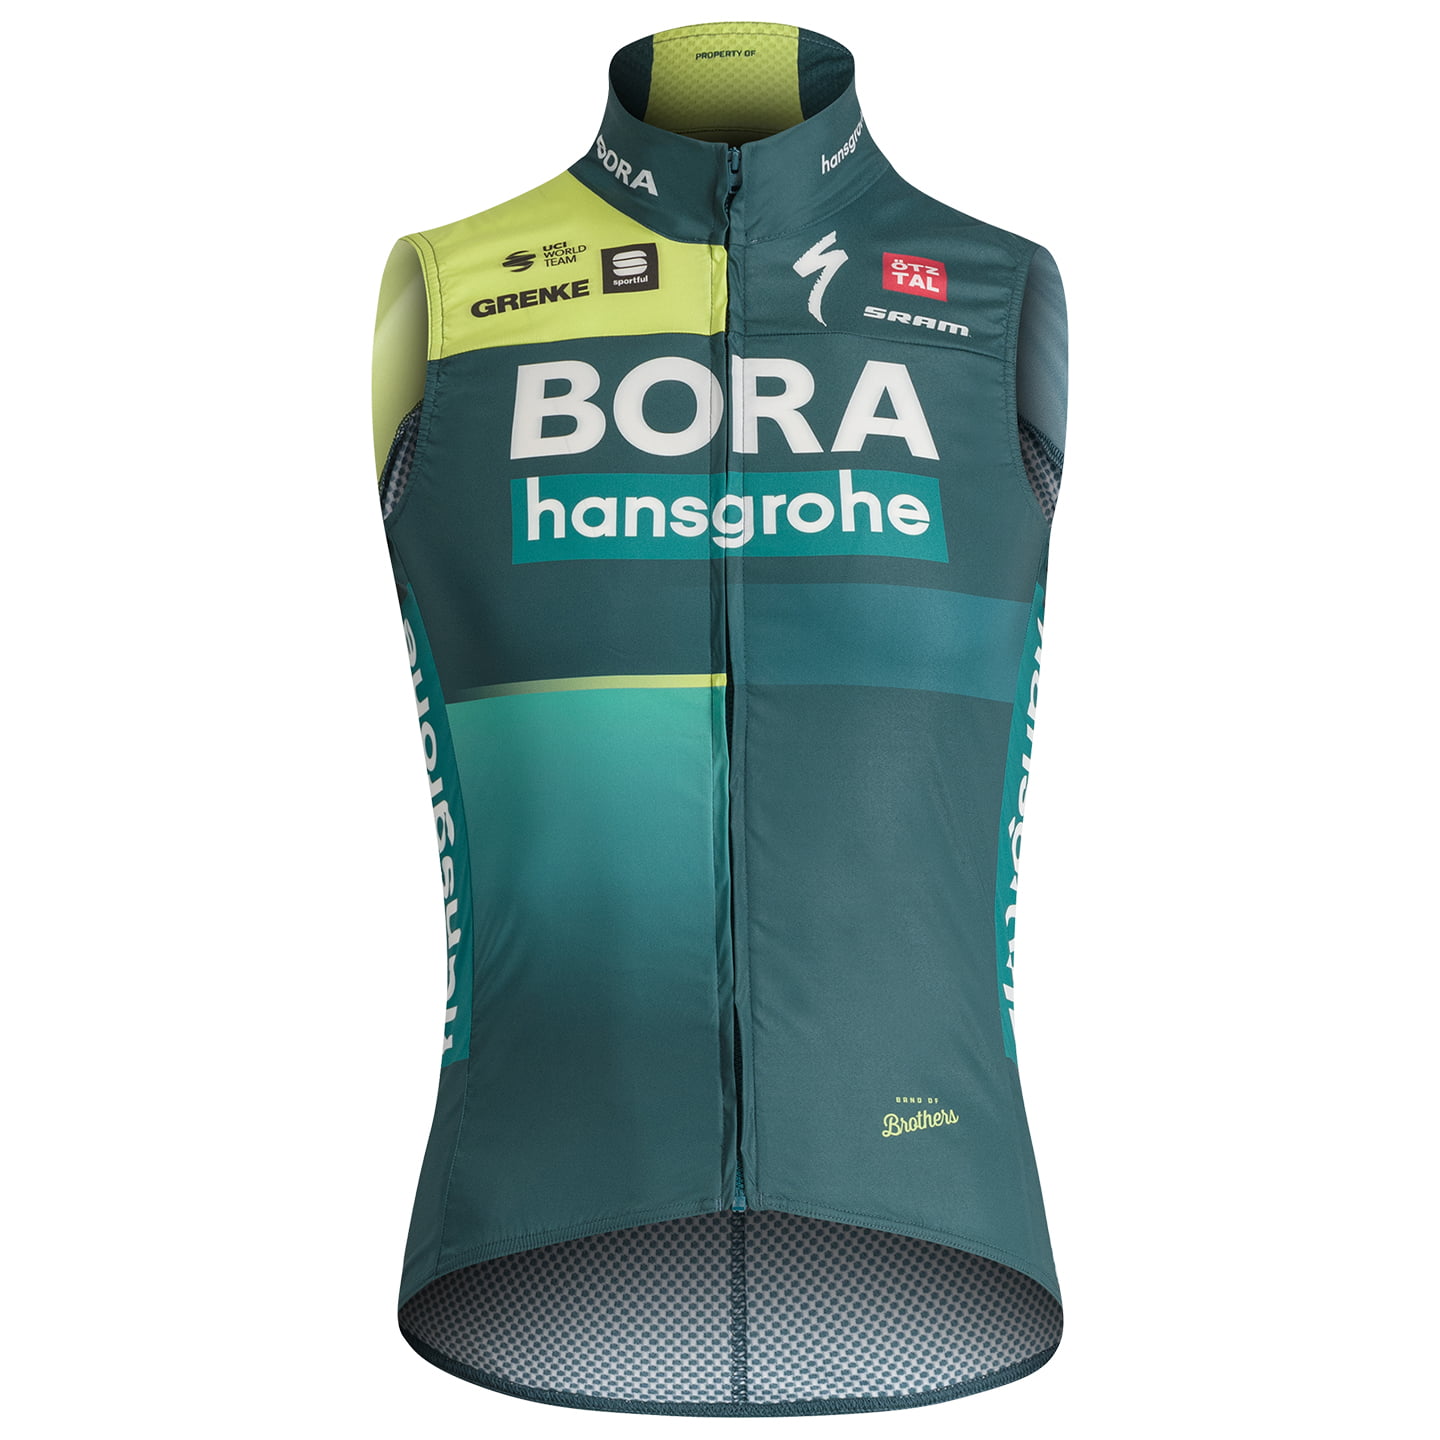 BORA-hansgrohe 2024 Wind Vest, for men, size S, Cycling vest, Cycling clothing